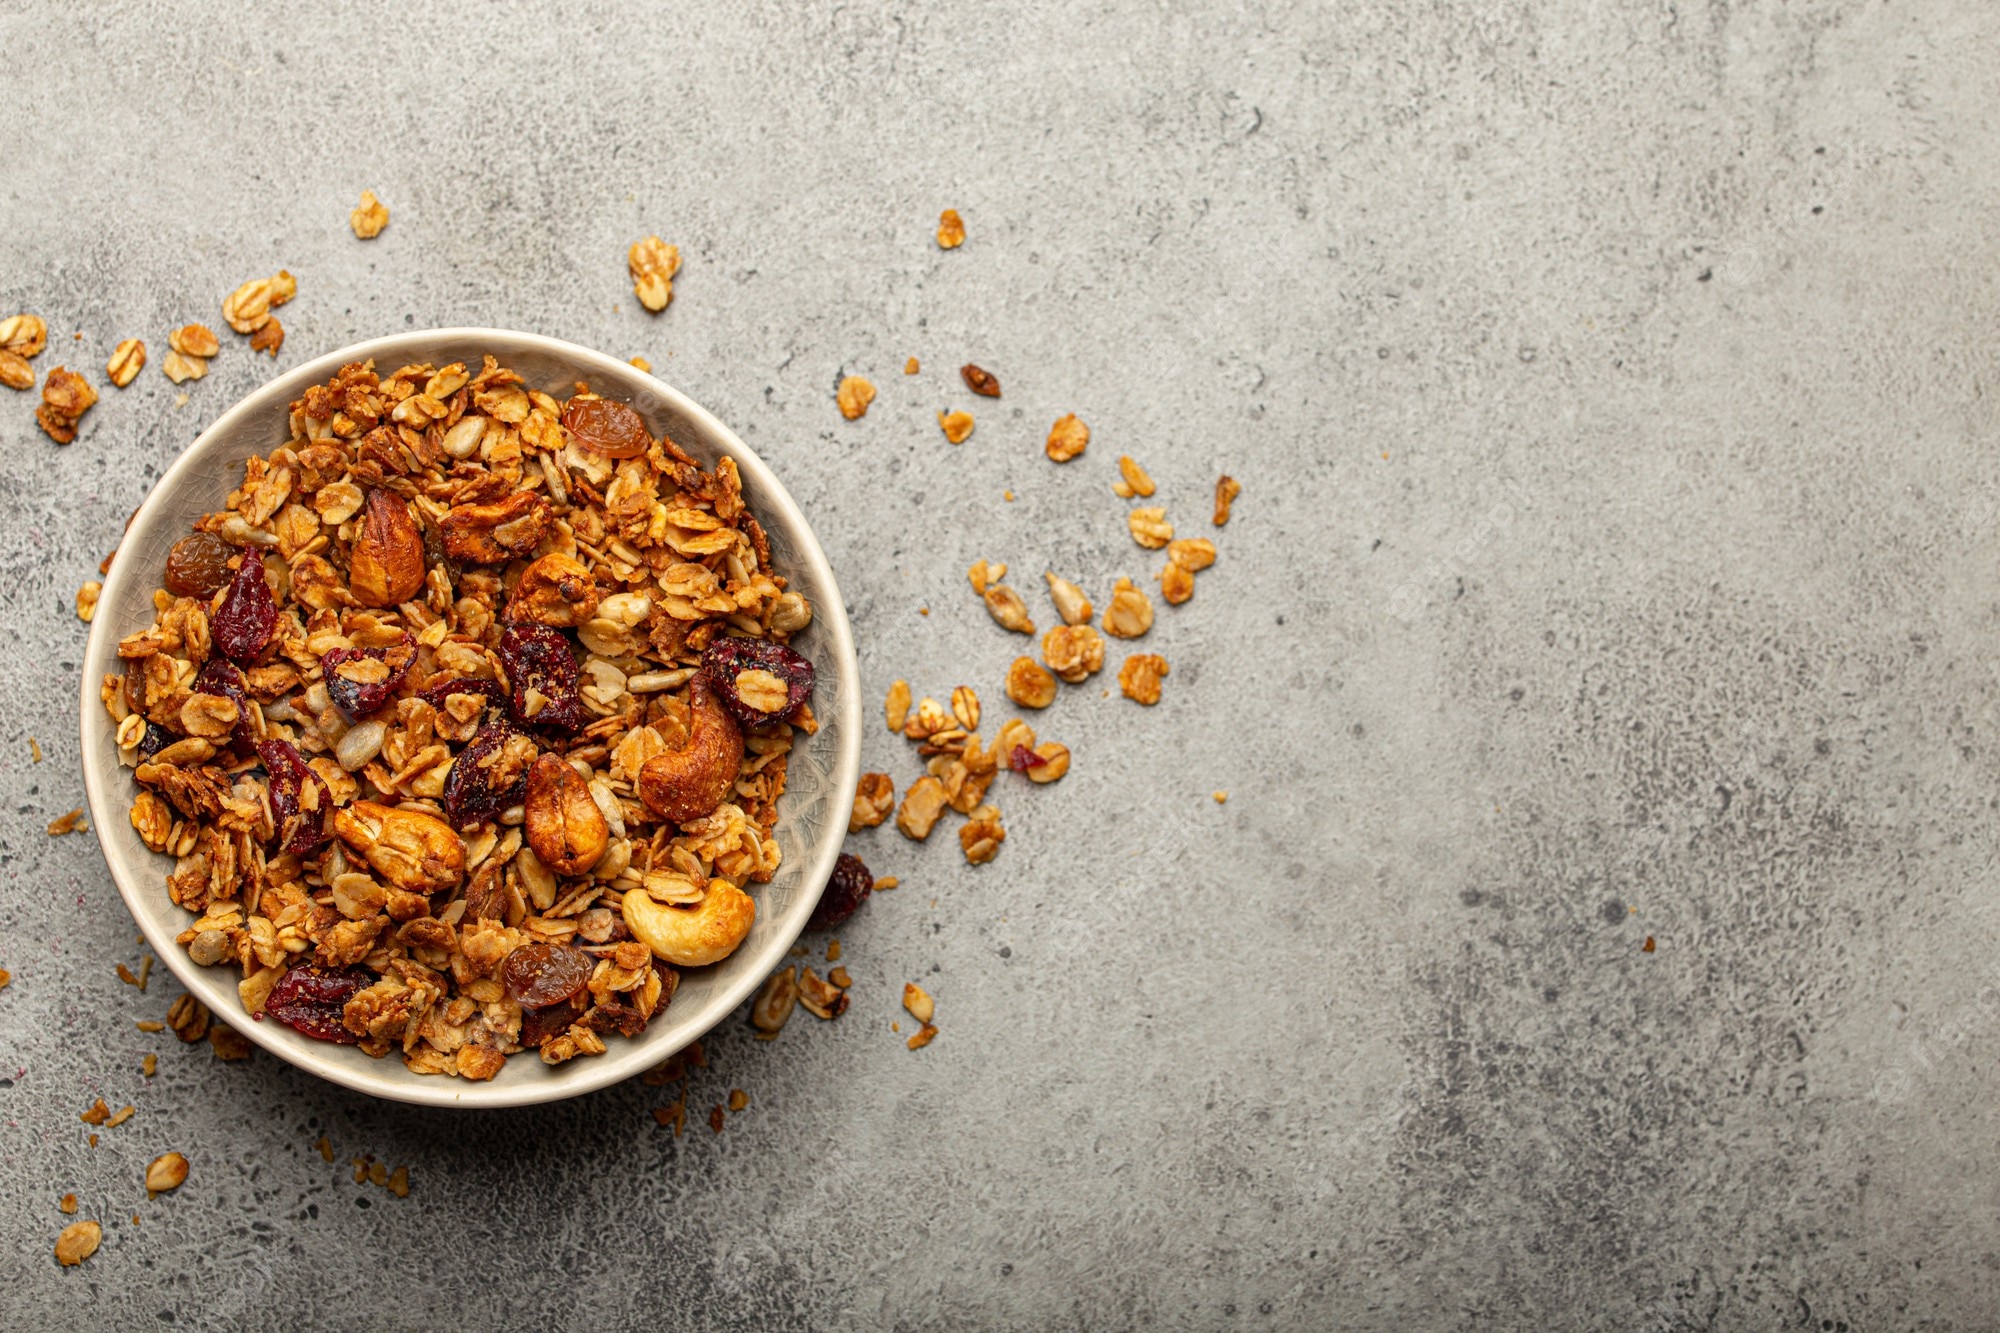 bowl with crispy homemade granola healthy breakfast cereal granola with oatmeal seeds nuts berries rustic stone background from with space text 92134 2487